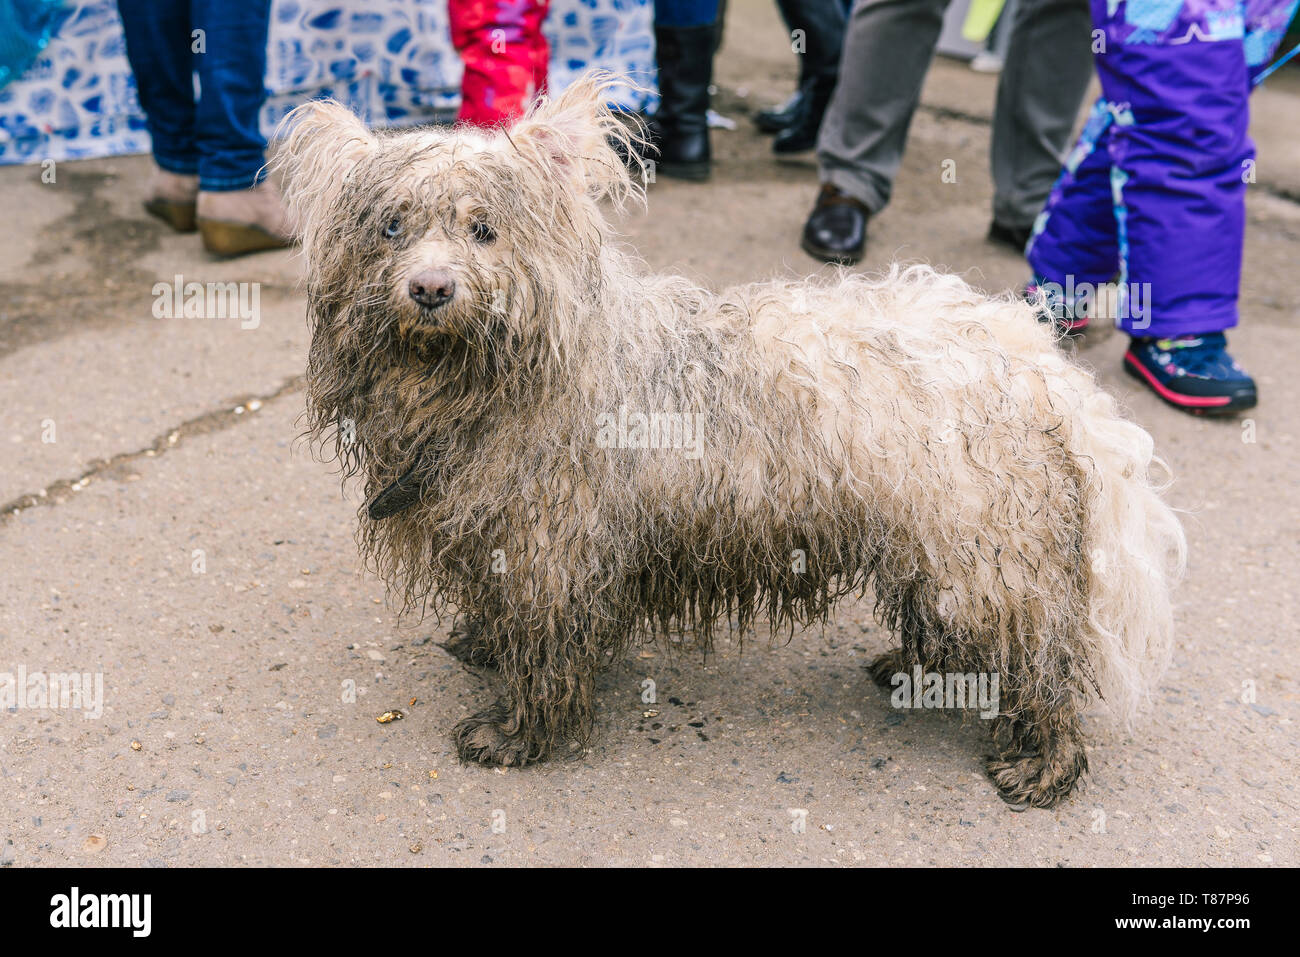 The domestic dog was lost in the city. The animal is looking for its home. Wet, dirty white dog close-up. Wet wool Stock Photo